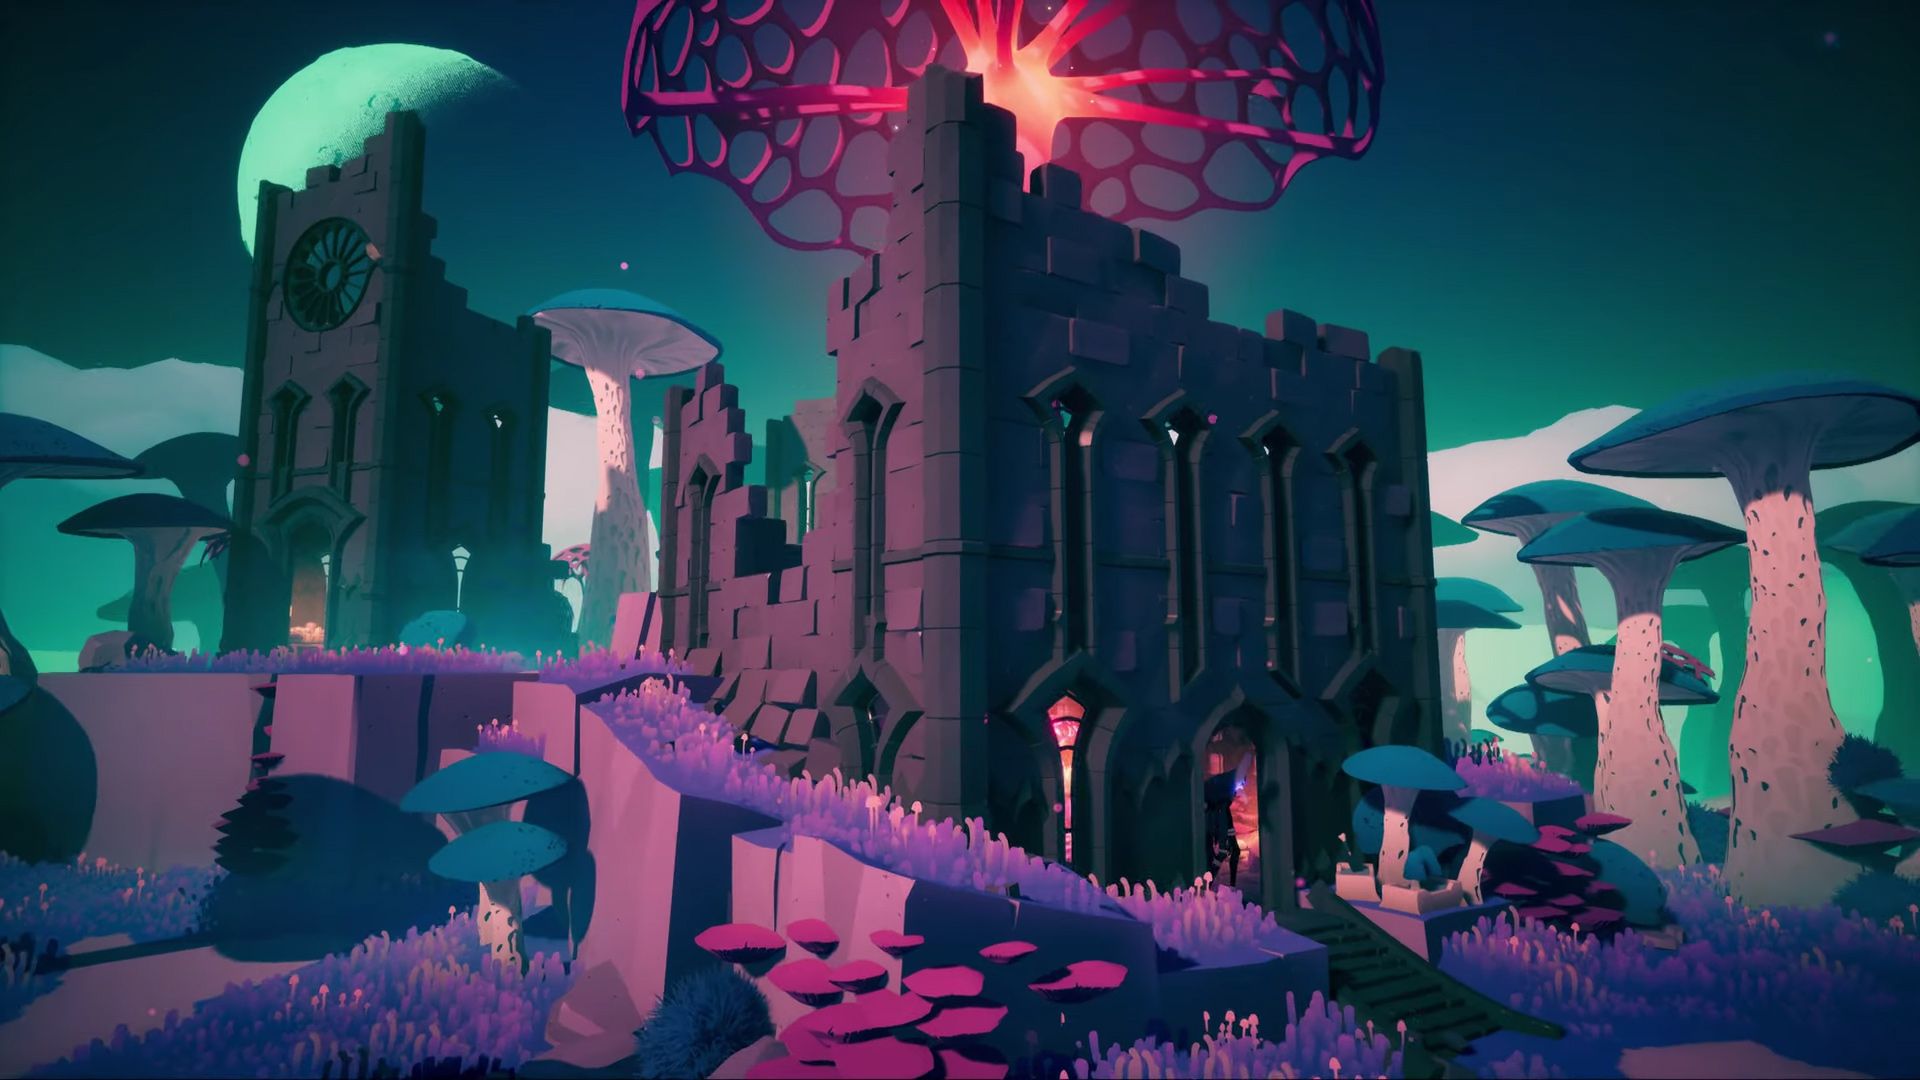 Hyper Light Drifter  how heart disease inspired one of 2016s great games   Games  The Guardian